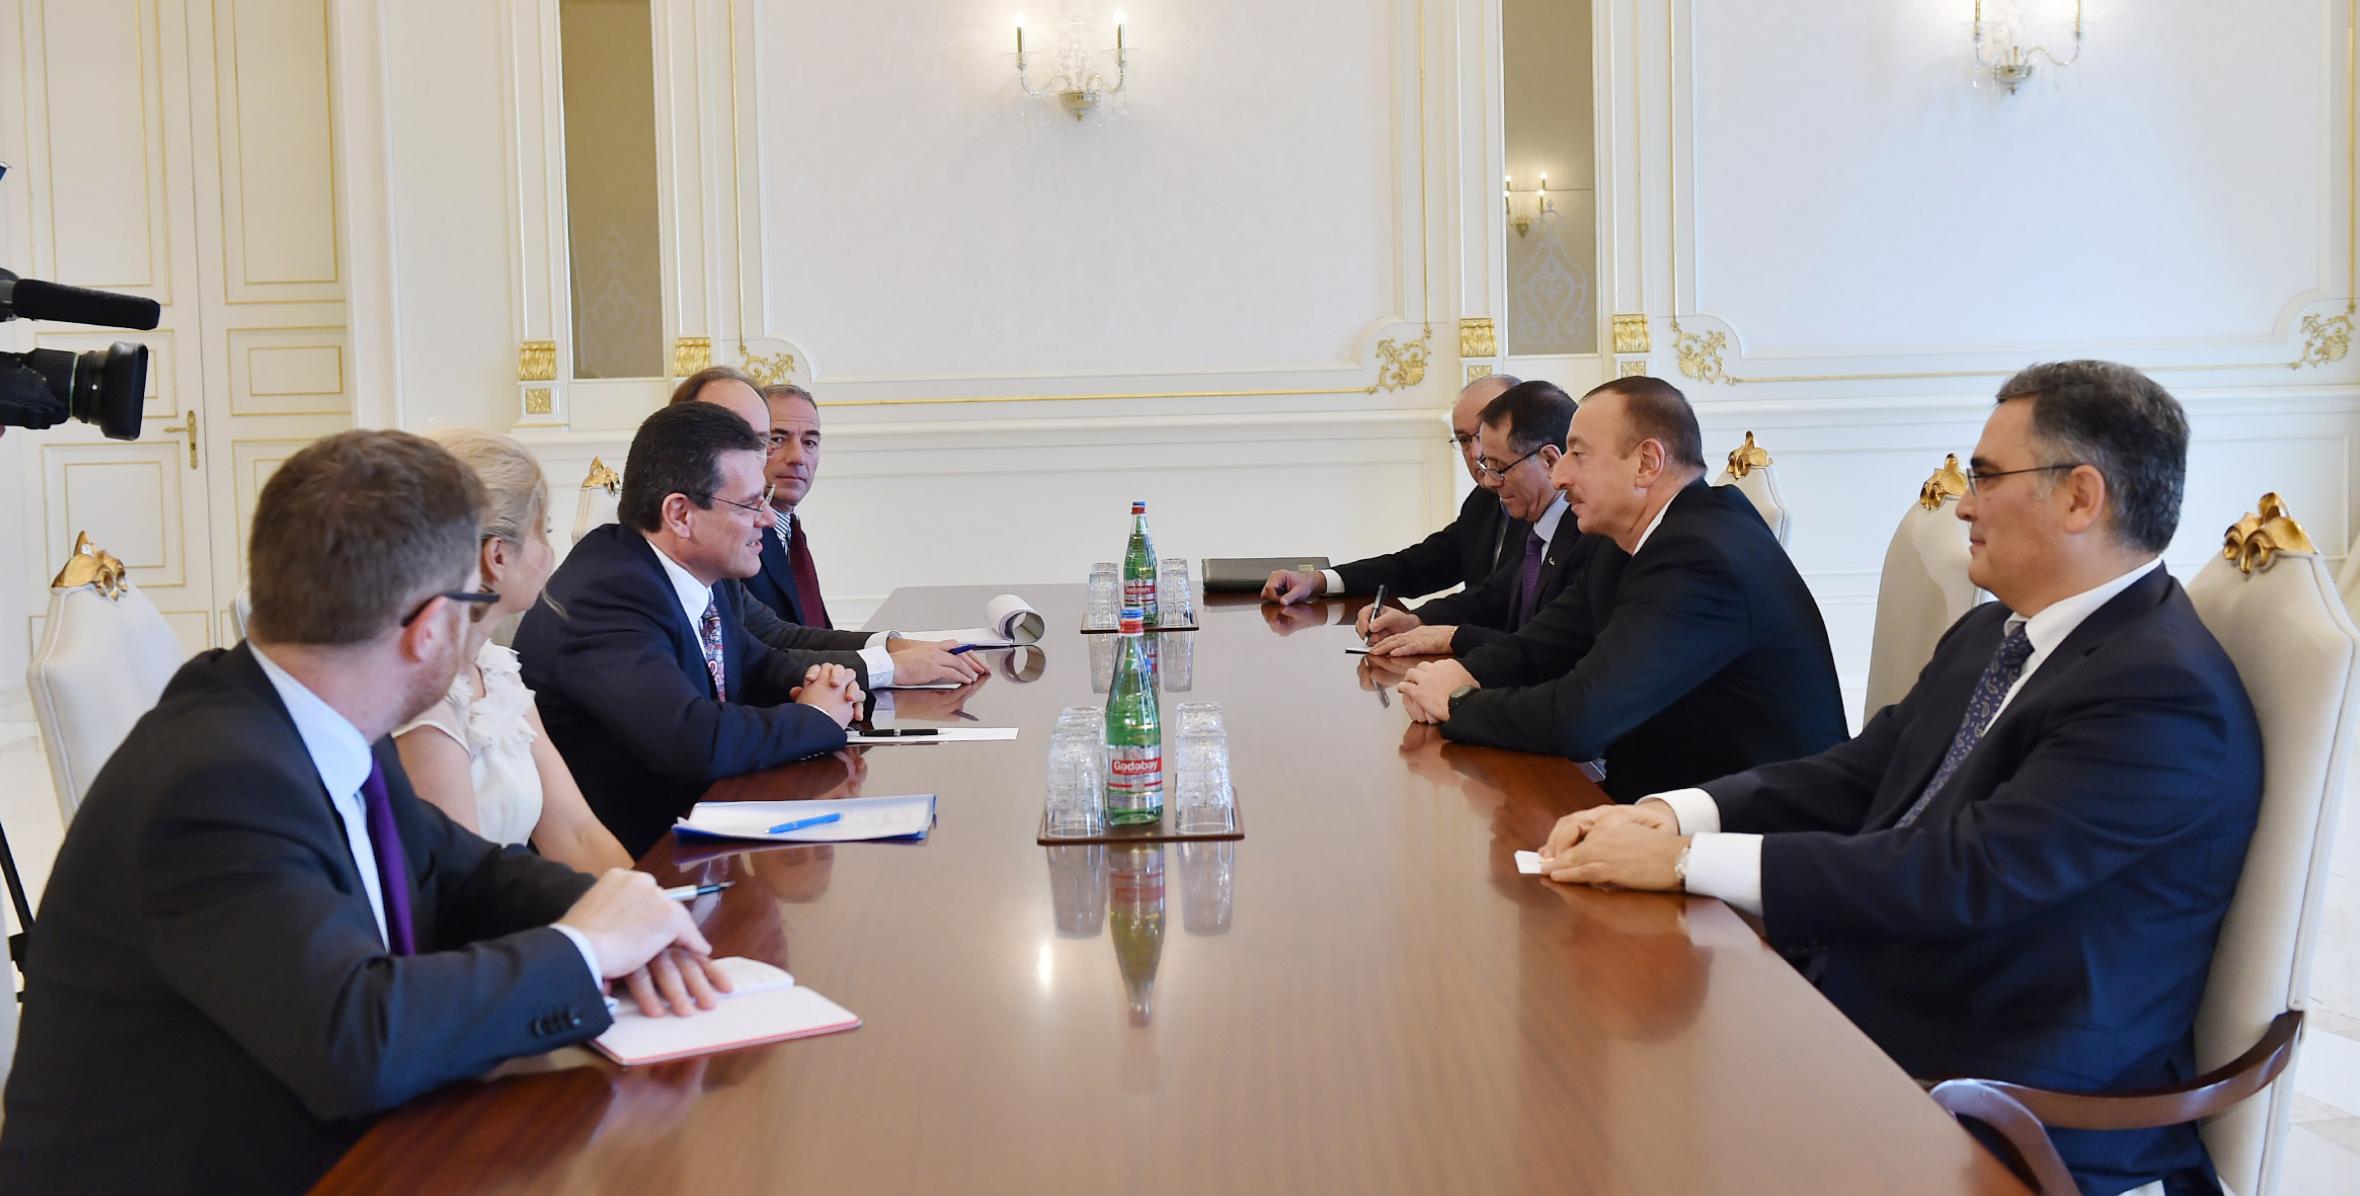 Ilham Aliyev received a delegation led by the Vice-President of the European Commission